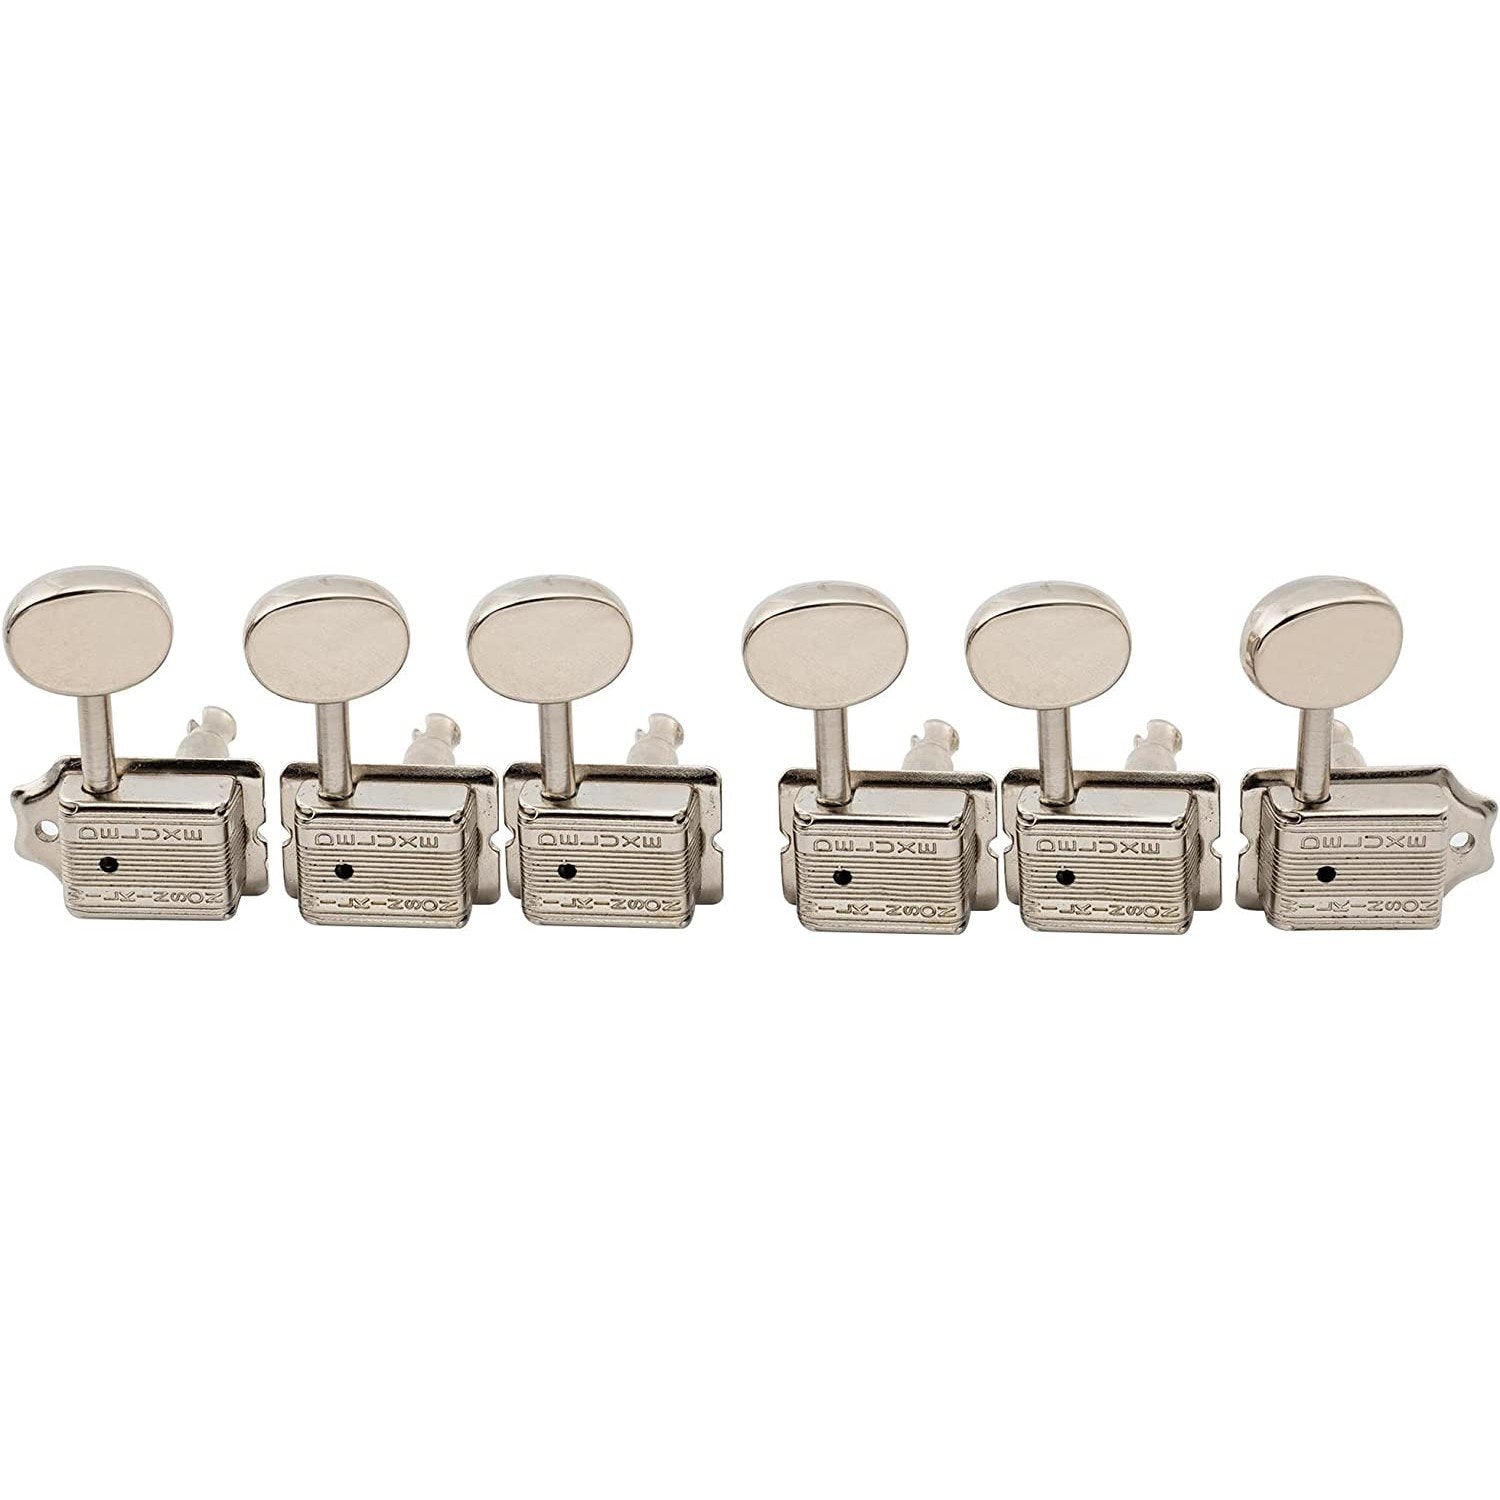 Wilkinson Deluxe 6 Inline Vintage Tuning Pegs with Slotted Posts, Nickel